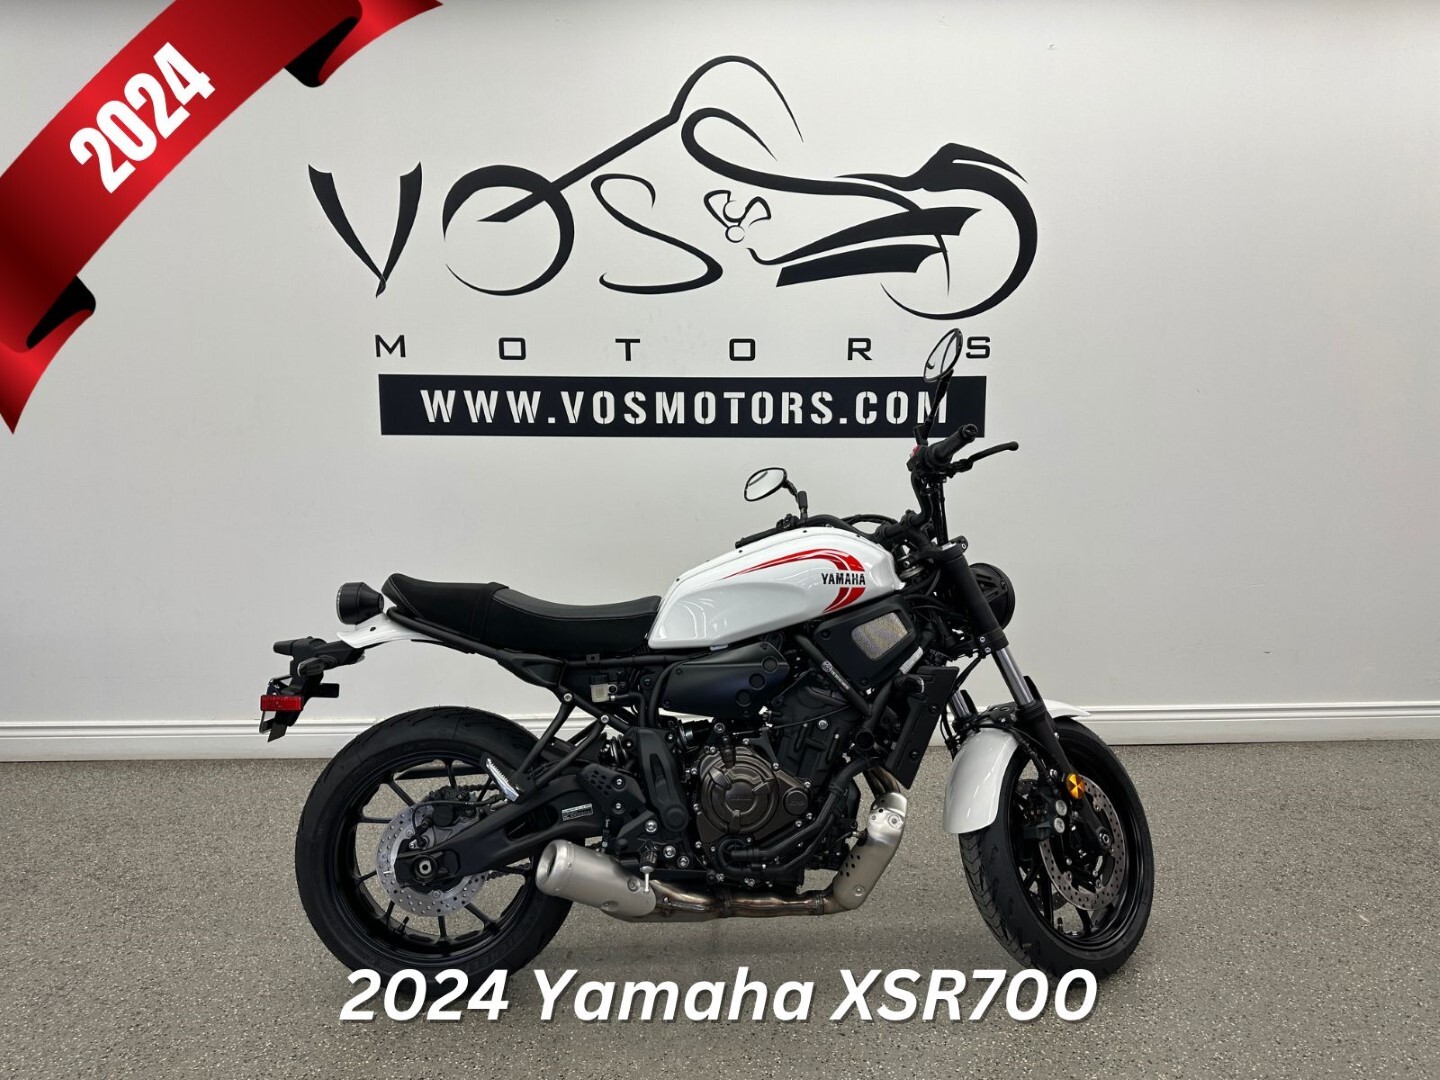 2024 Yamaha XSR700ARW XSR700ARW - V6018NP - -No Payments for 1 Year**